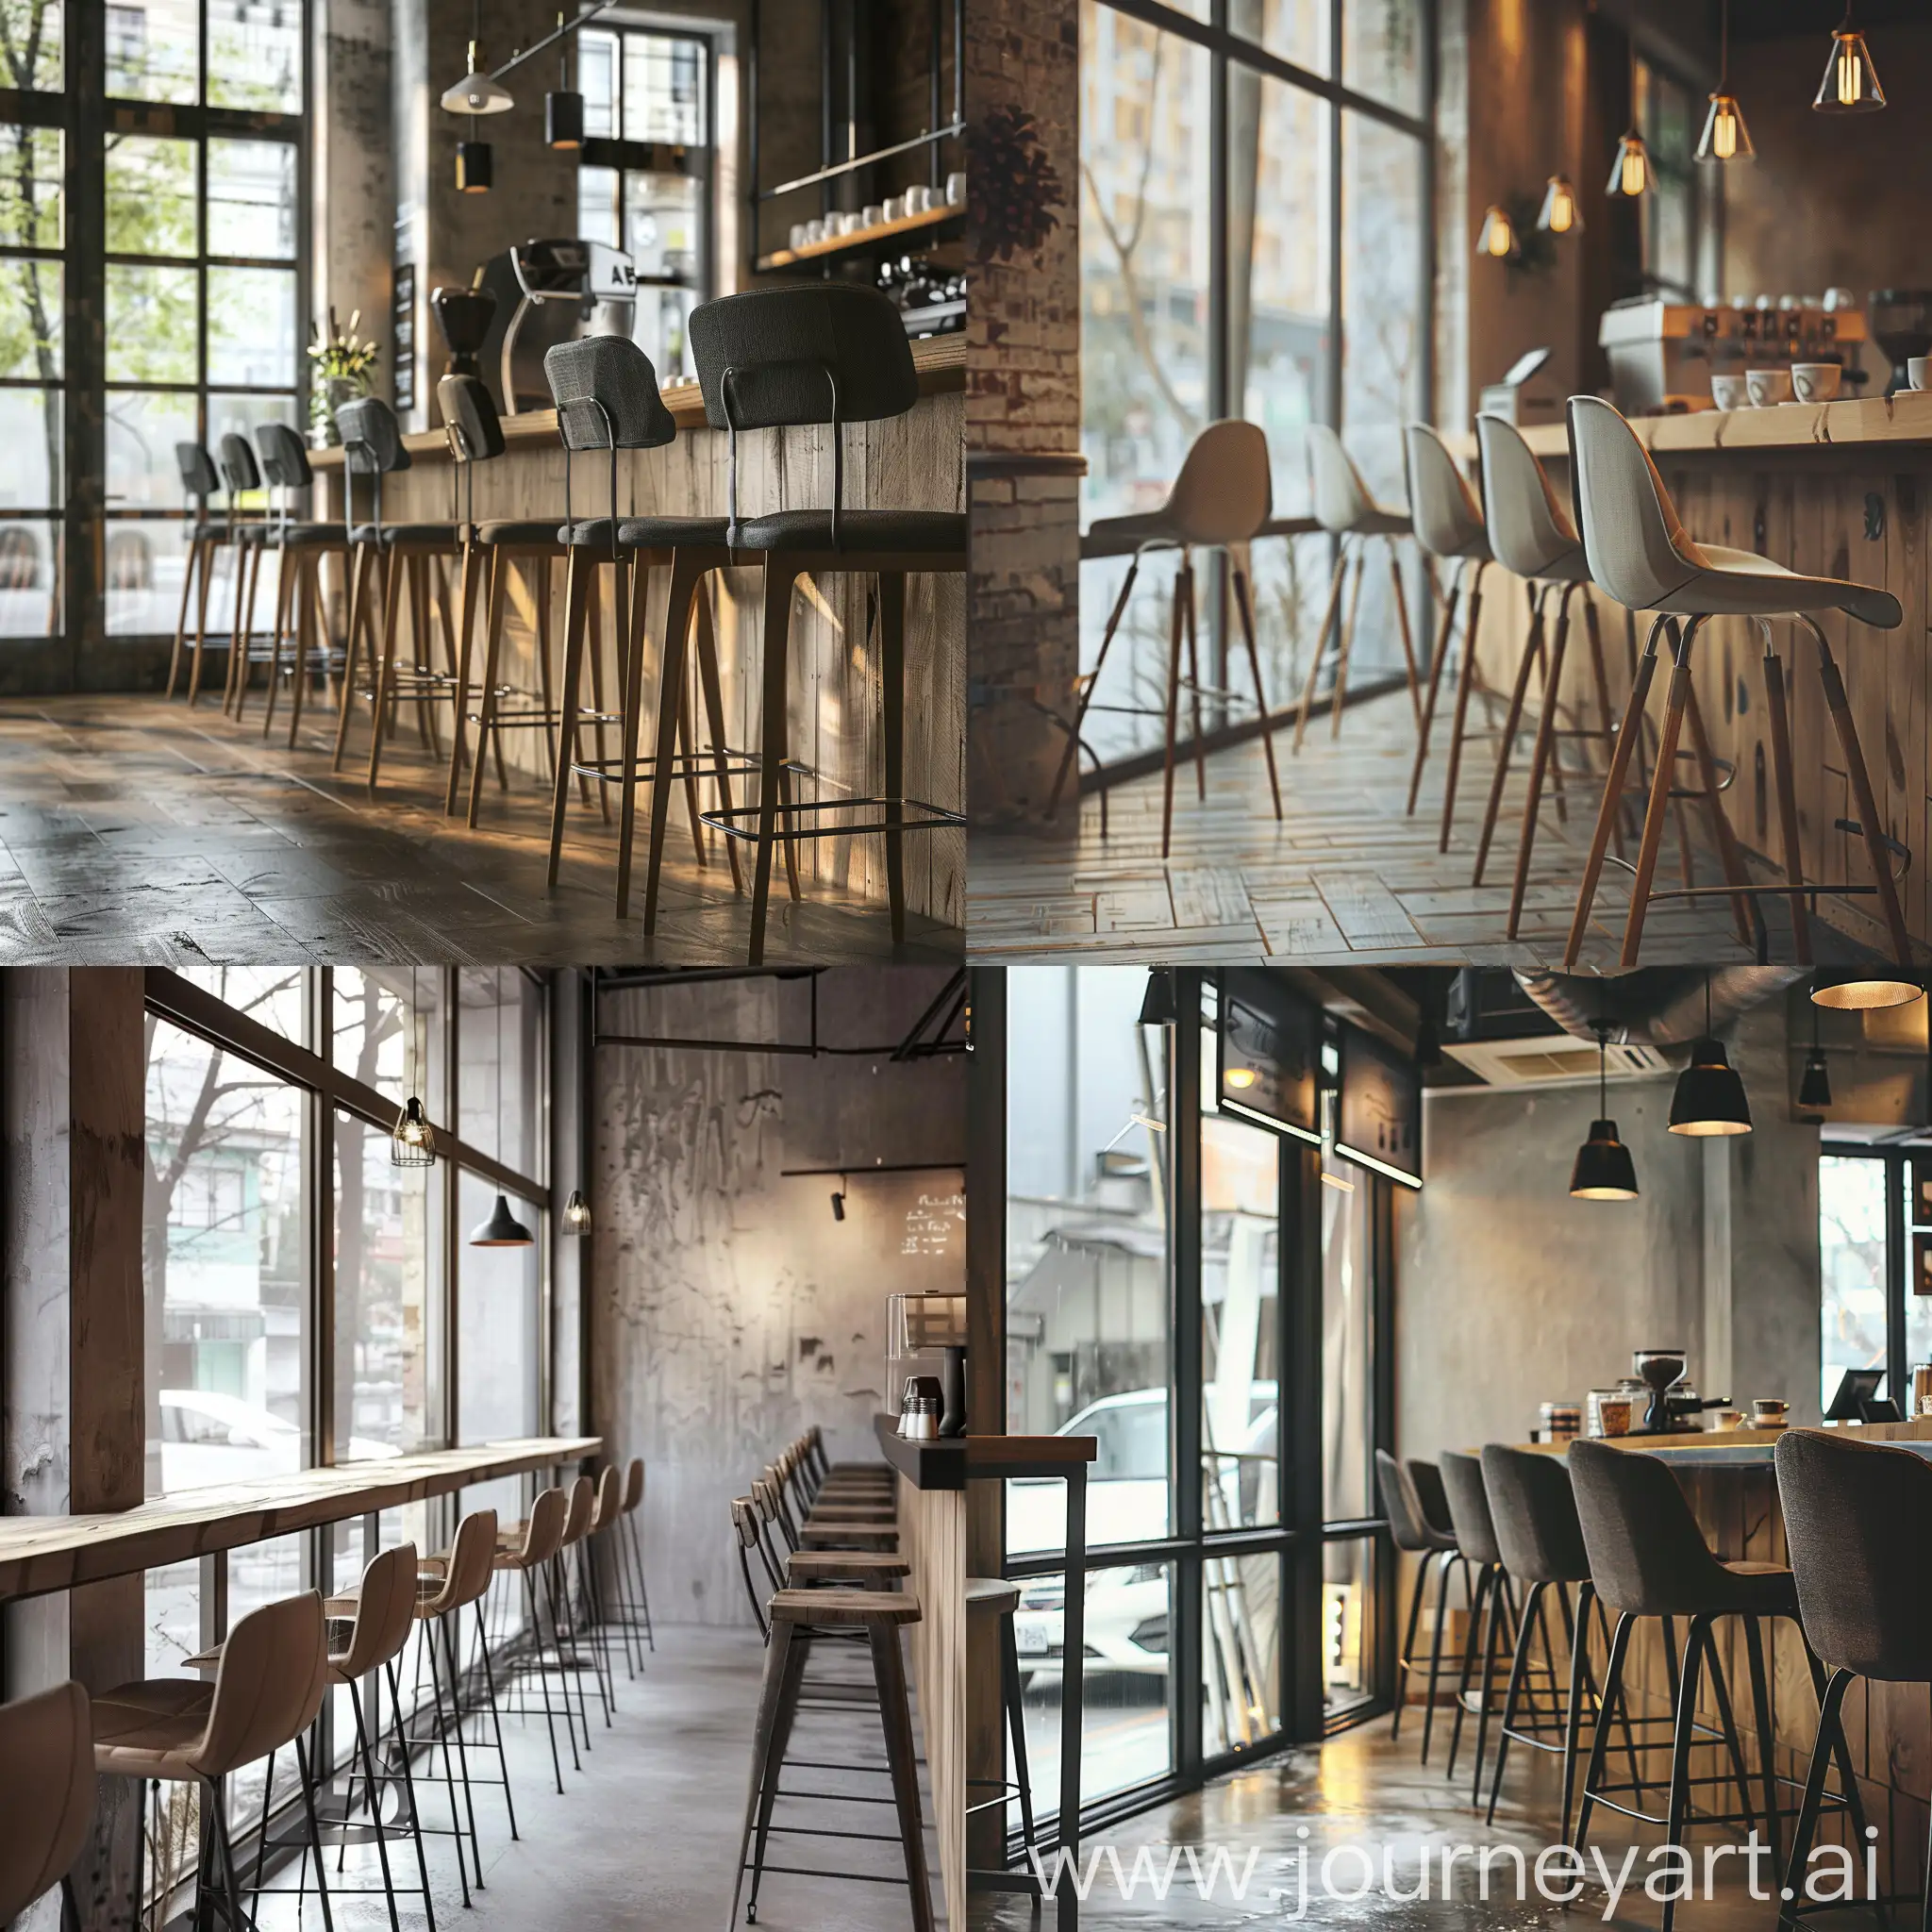 Urban-Coffee-Shop-with-WabiSabi-Decor-and-High-Chairs-by-the-Window